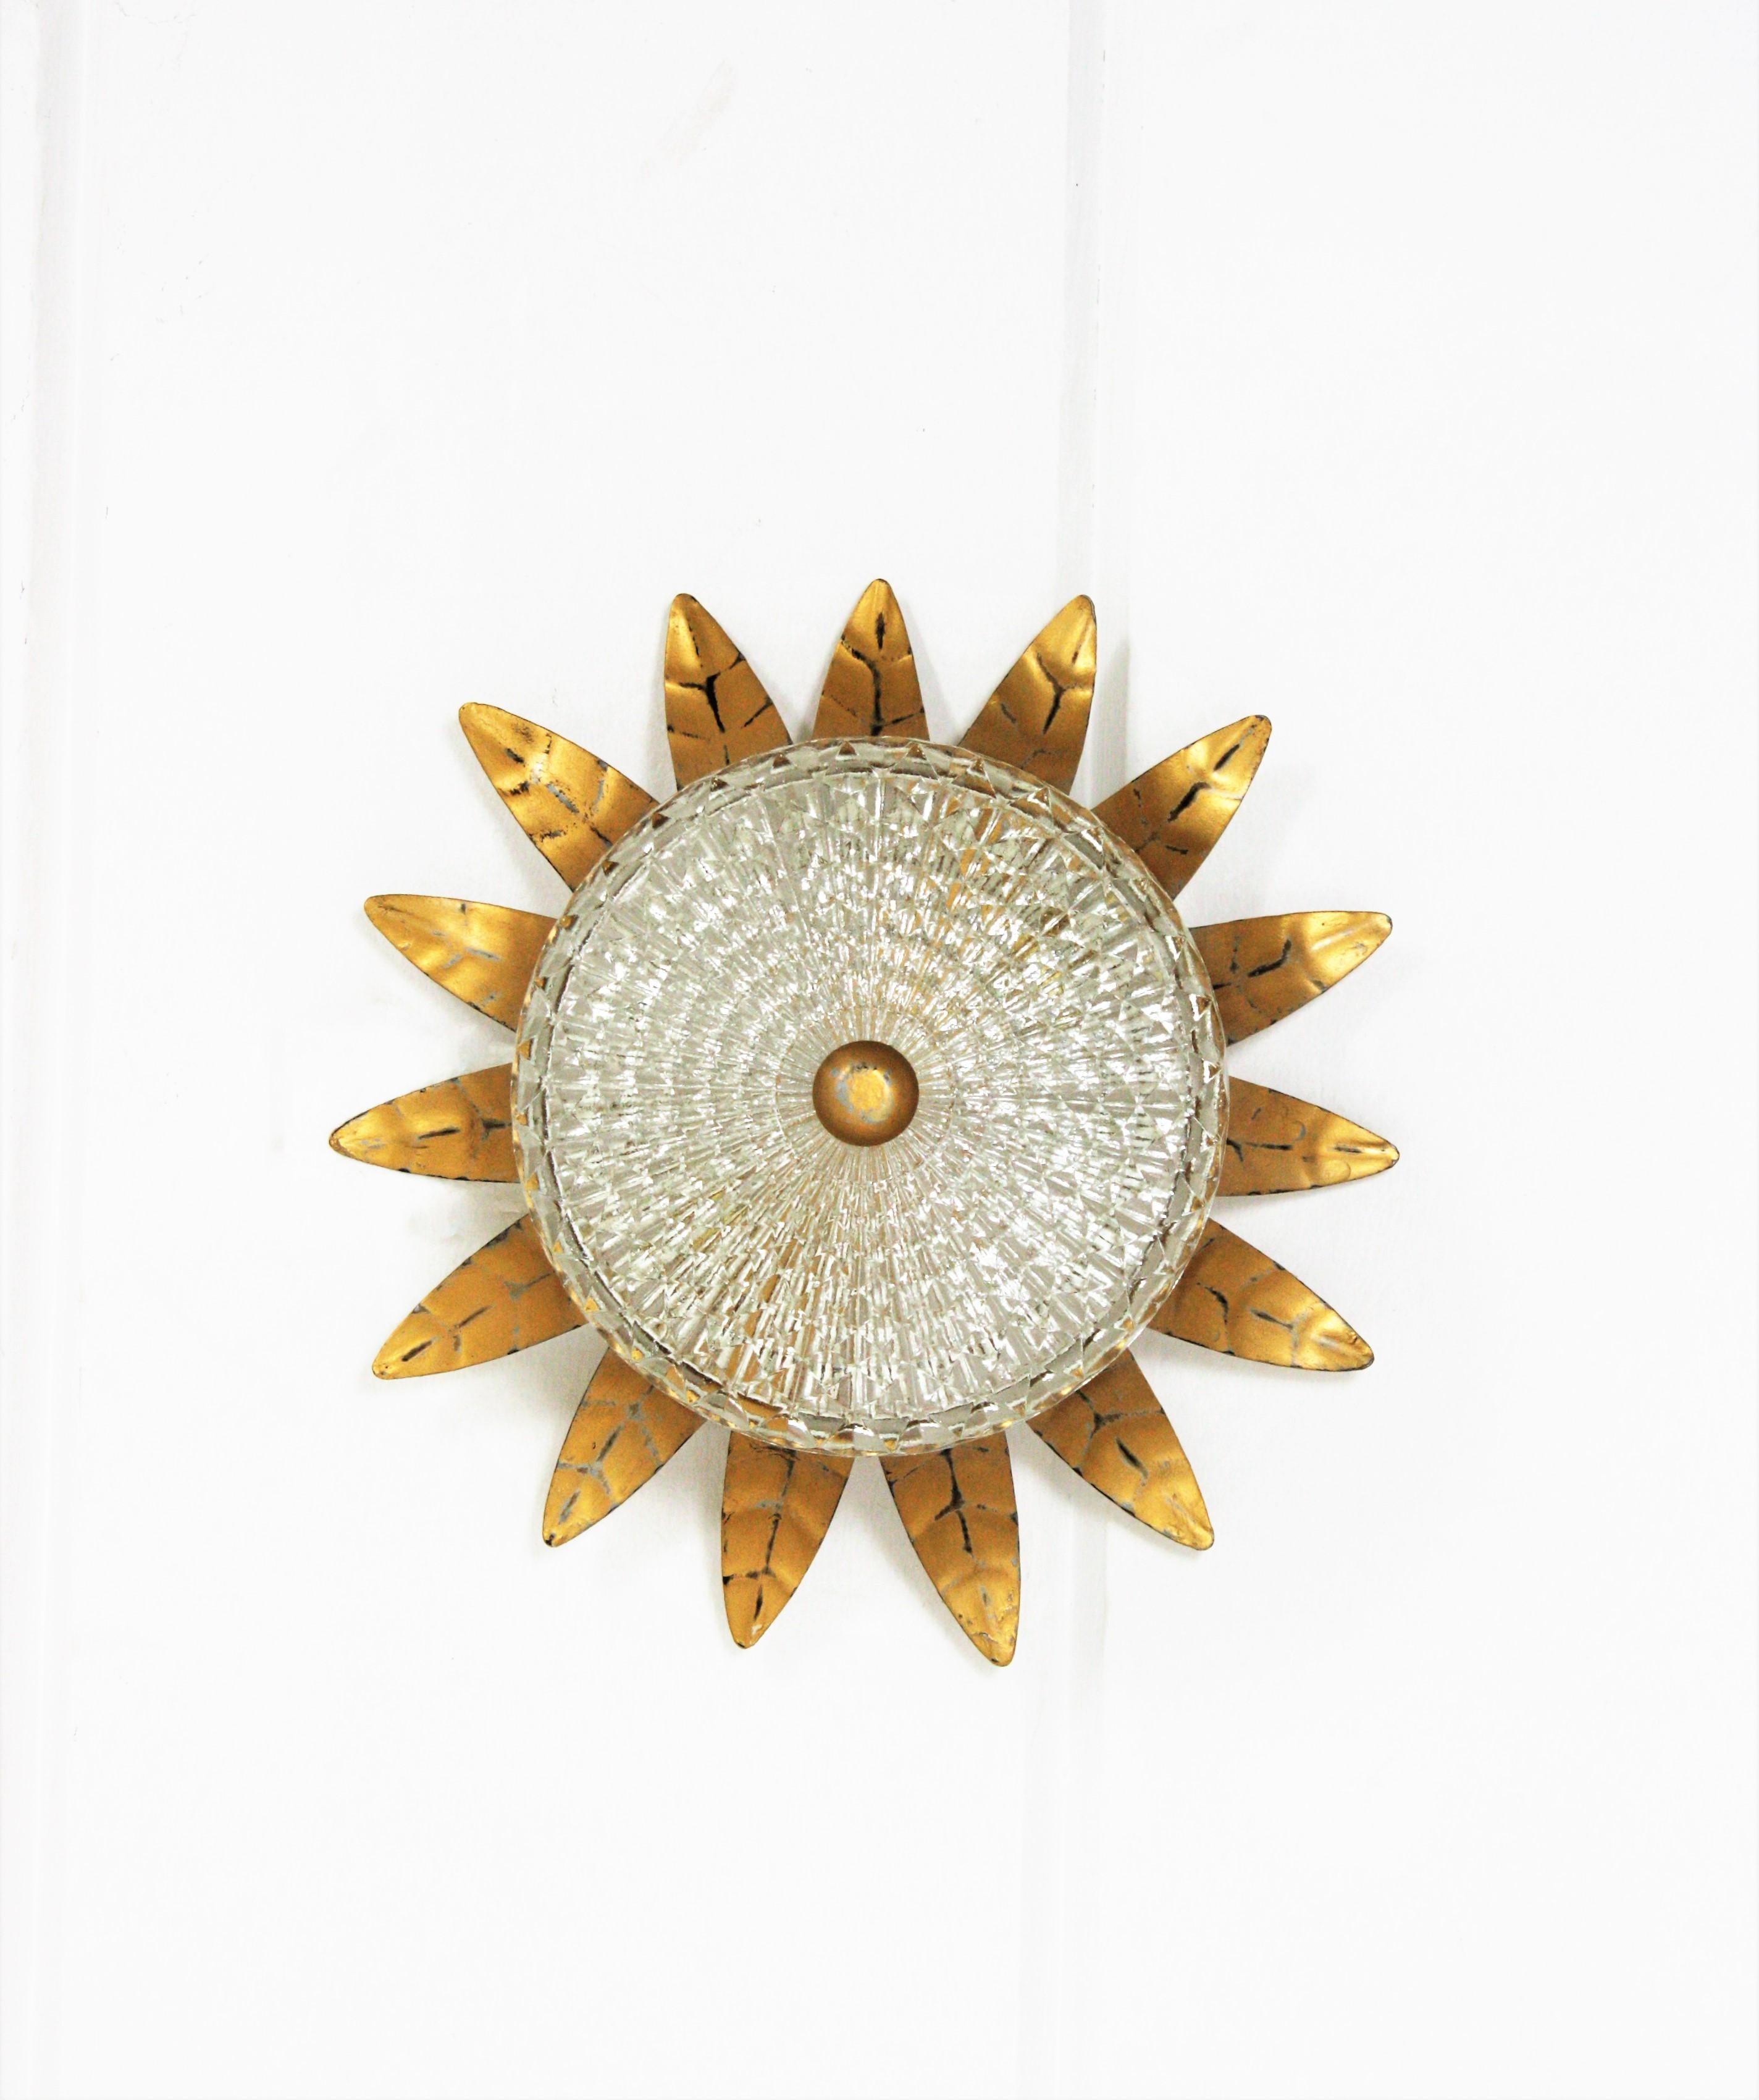 Neoclassical Sunburst Crown Light Fixture in Gilt Iron and Glass, 1950s For Sale